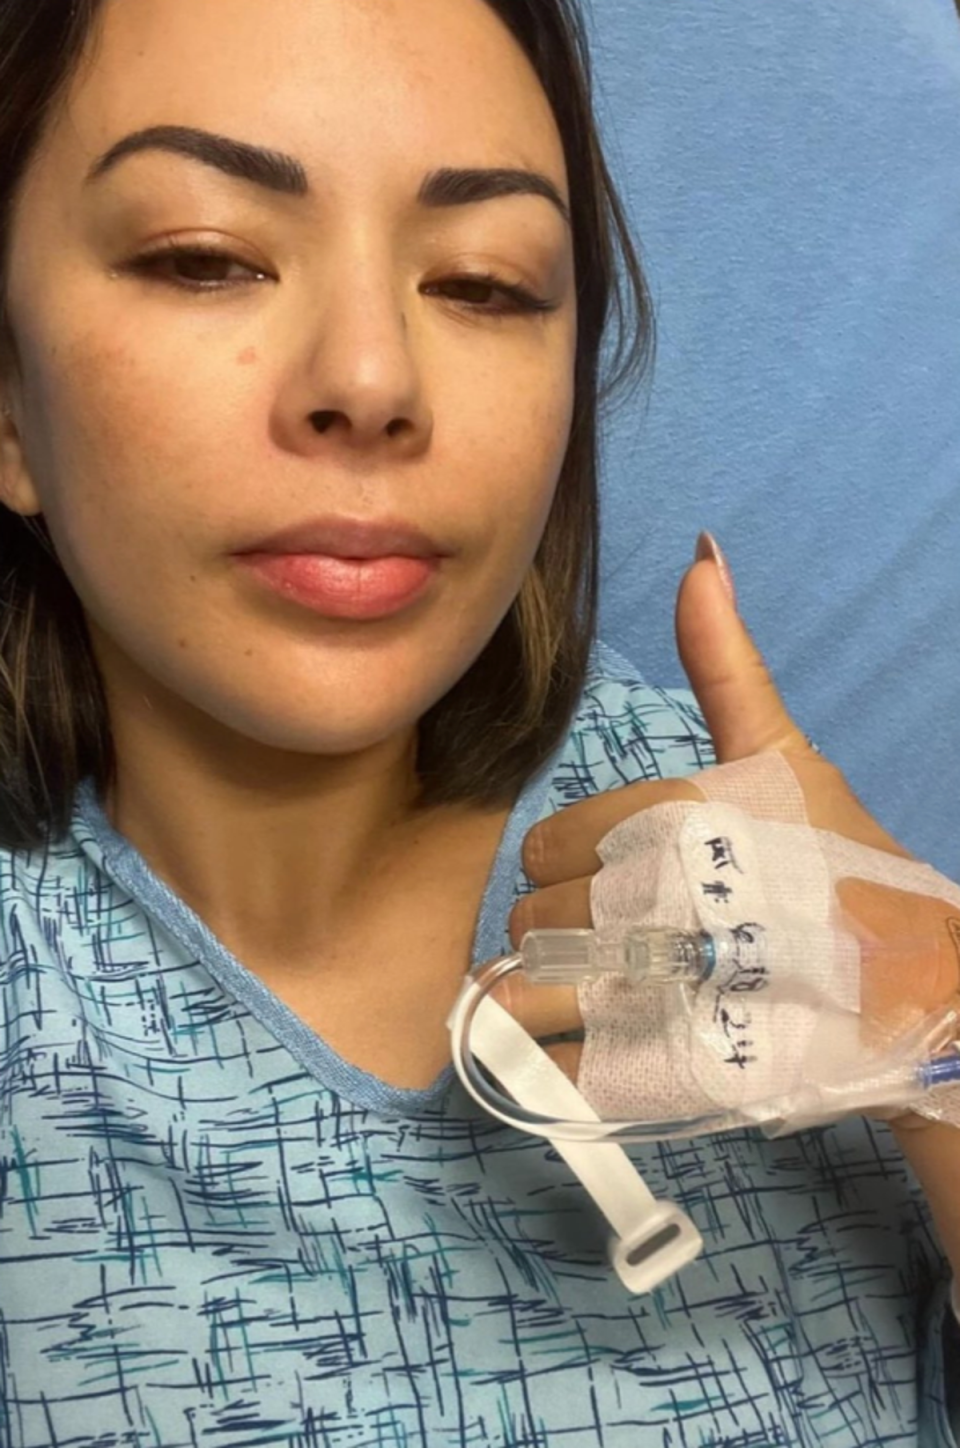 Janel Parrish has opened up about her endometriosis diagnosis that led to surgery (Instagram @janelparrish)